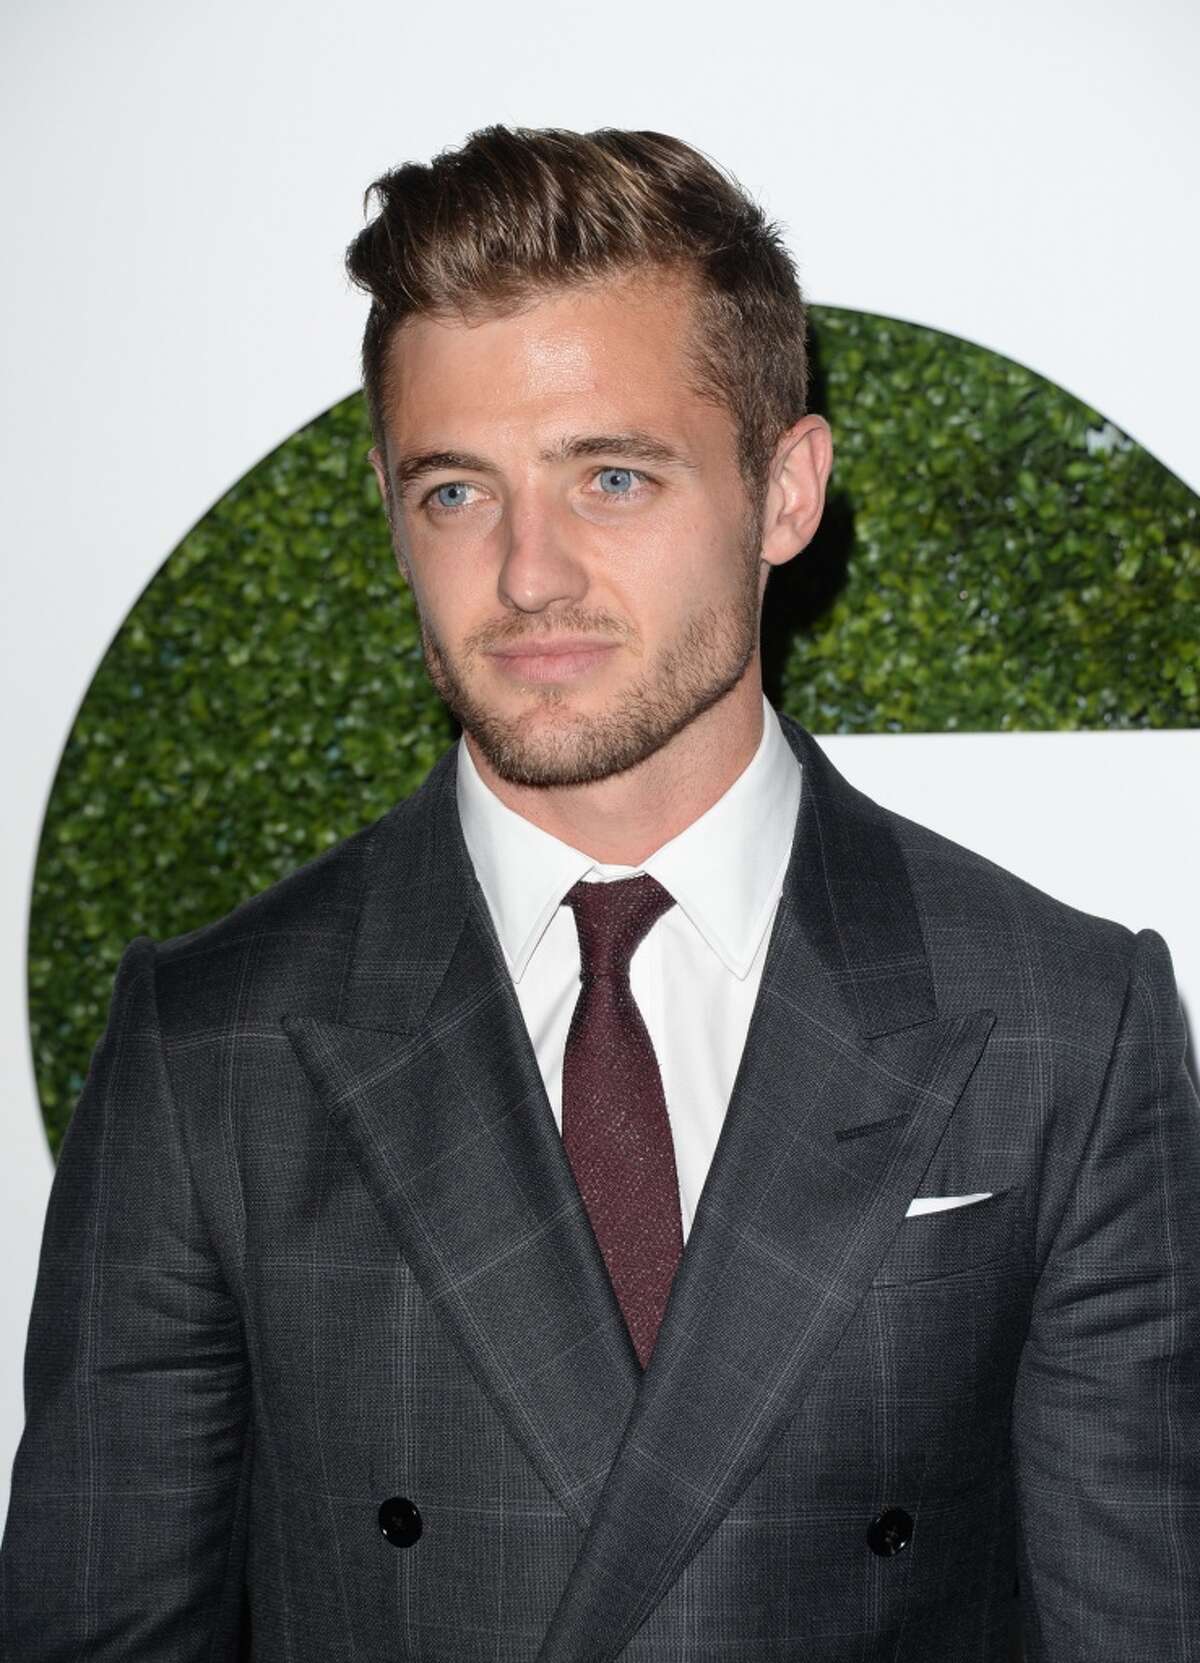 Pro soccer's gay heartthrob Robbie Rogers tells his own story